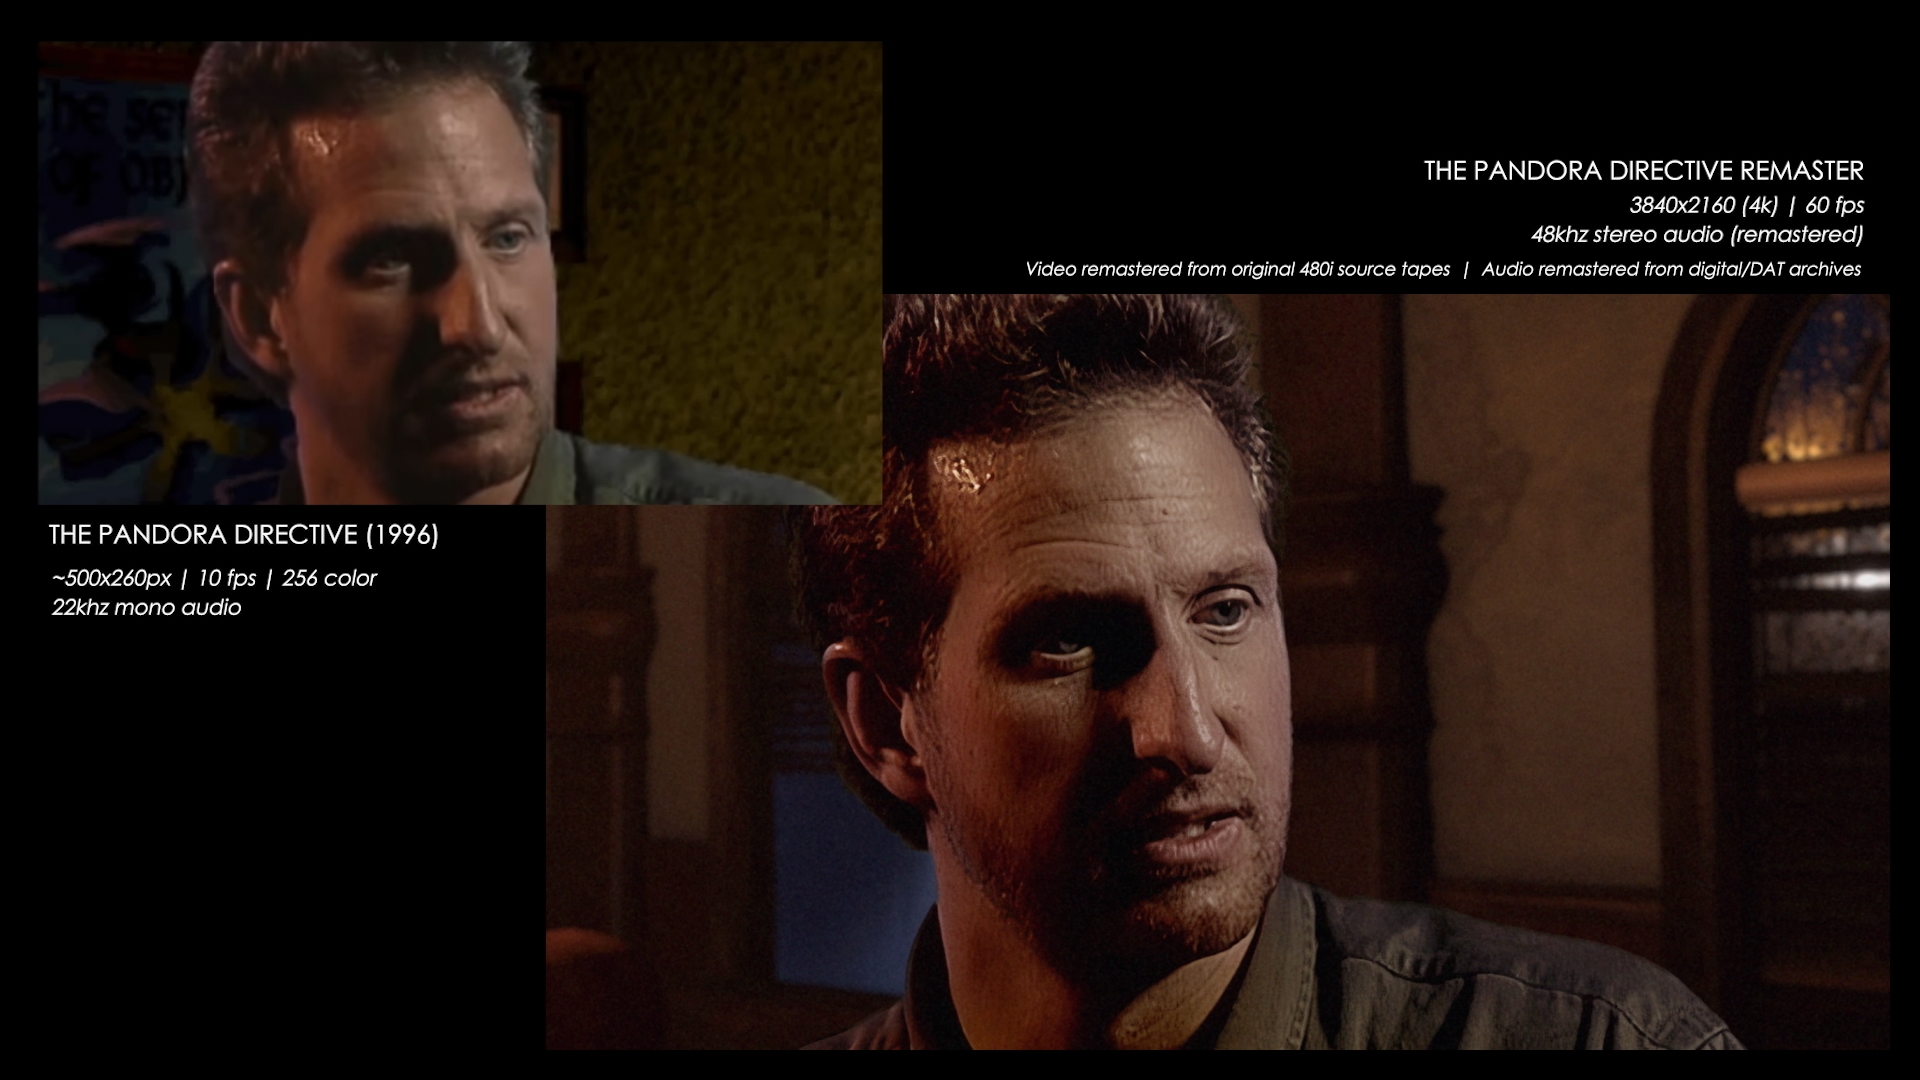 Comparison showing Tex talking to Fitzpatrick, between the 1996 version and the new remastered version.